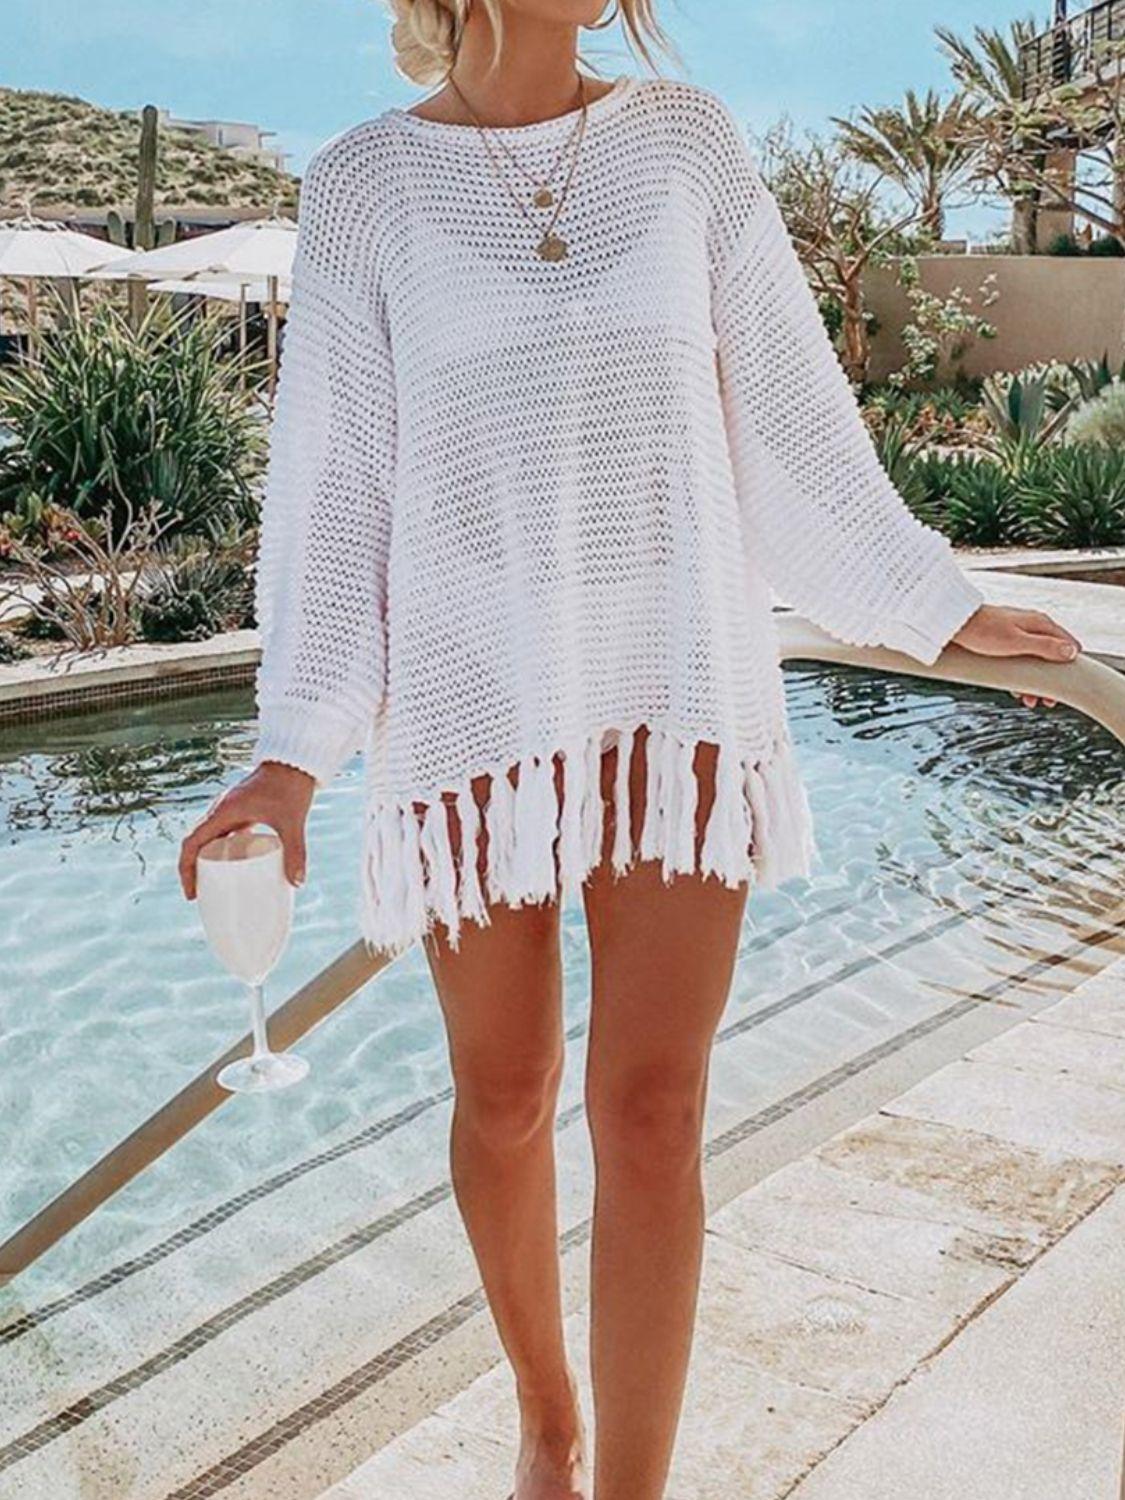 a woman standing next to a pool wearing a white sweater and shorts